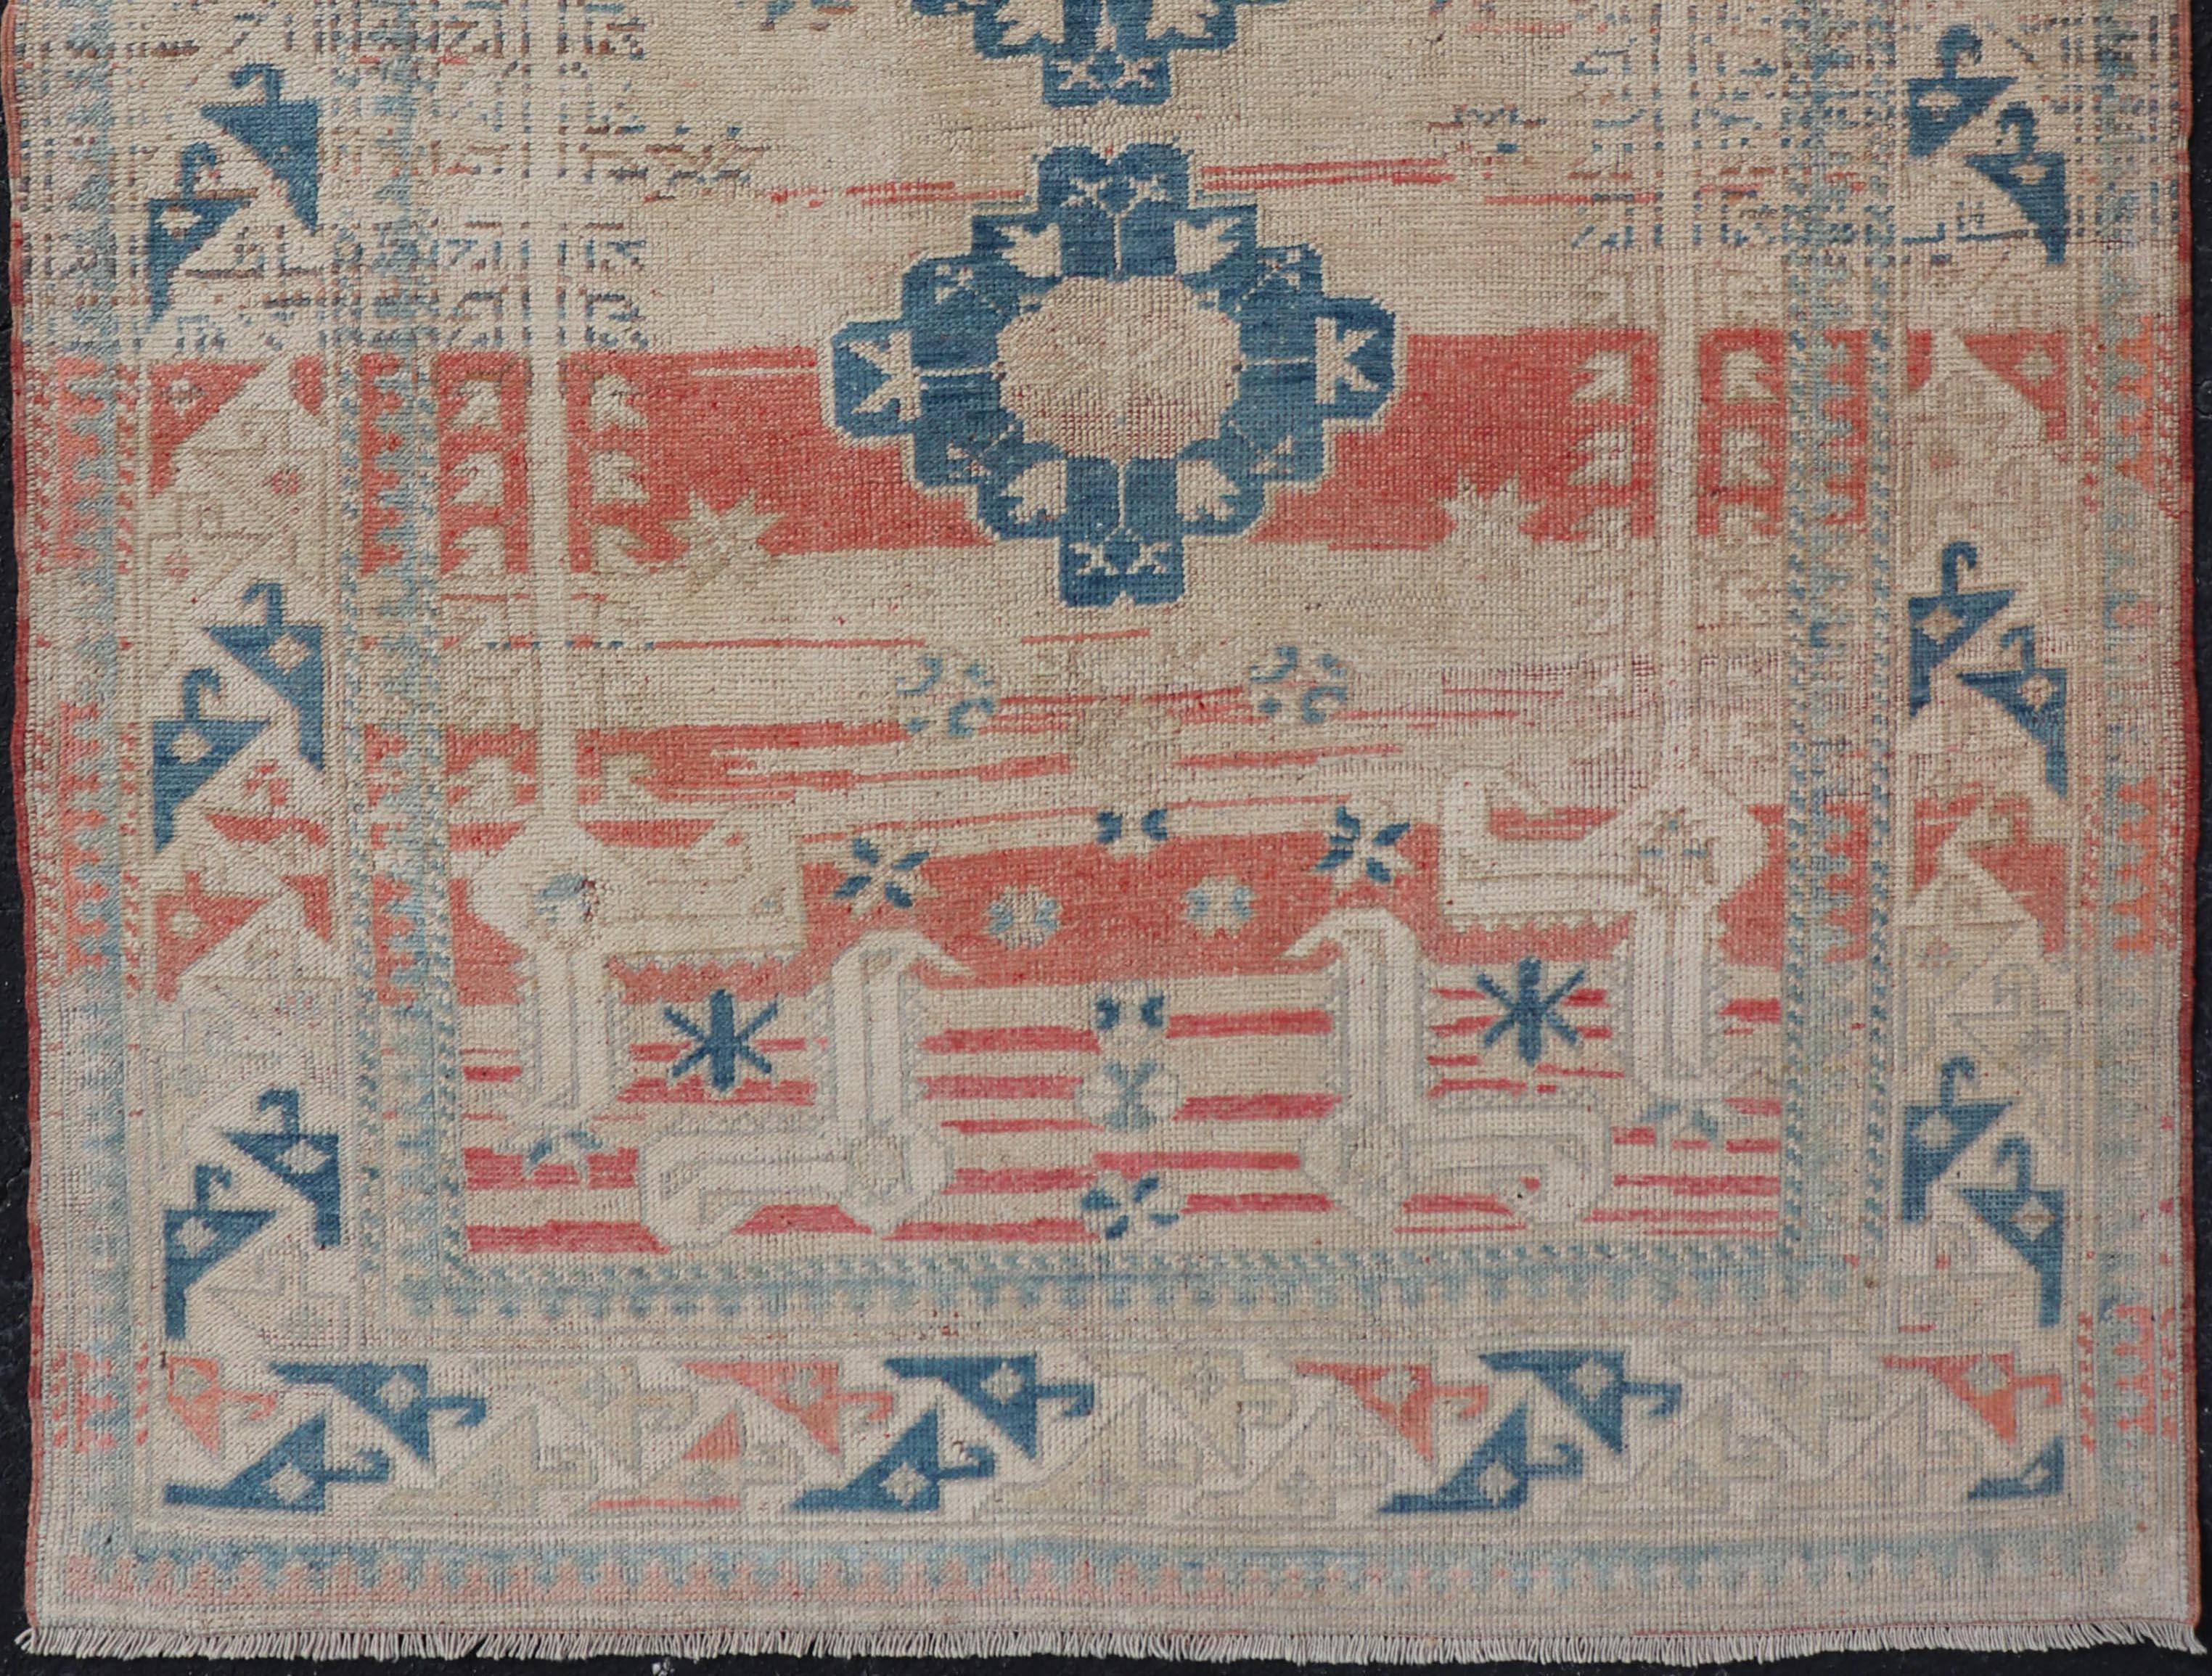 Measures: 4'5 x 6'7 

This vintage Oushak has repeating motifs in terracotta, cream, and blue encasing multiple motifs and the striped field. The eccentric field features two medallions in rich blue and accessorized lightly with cream colored